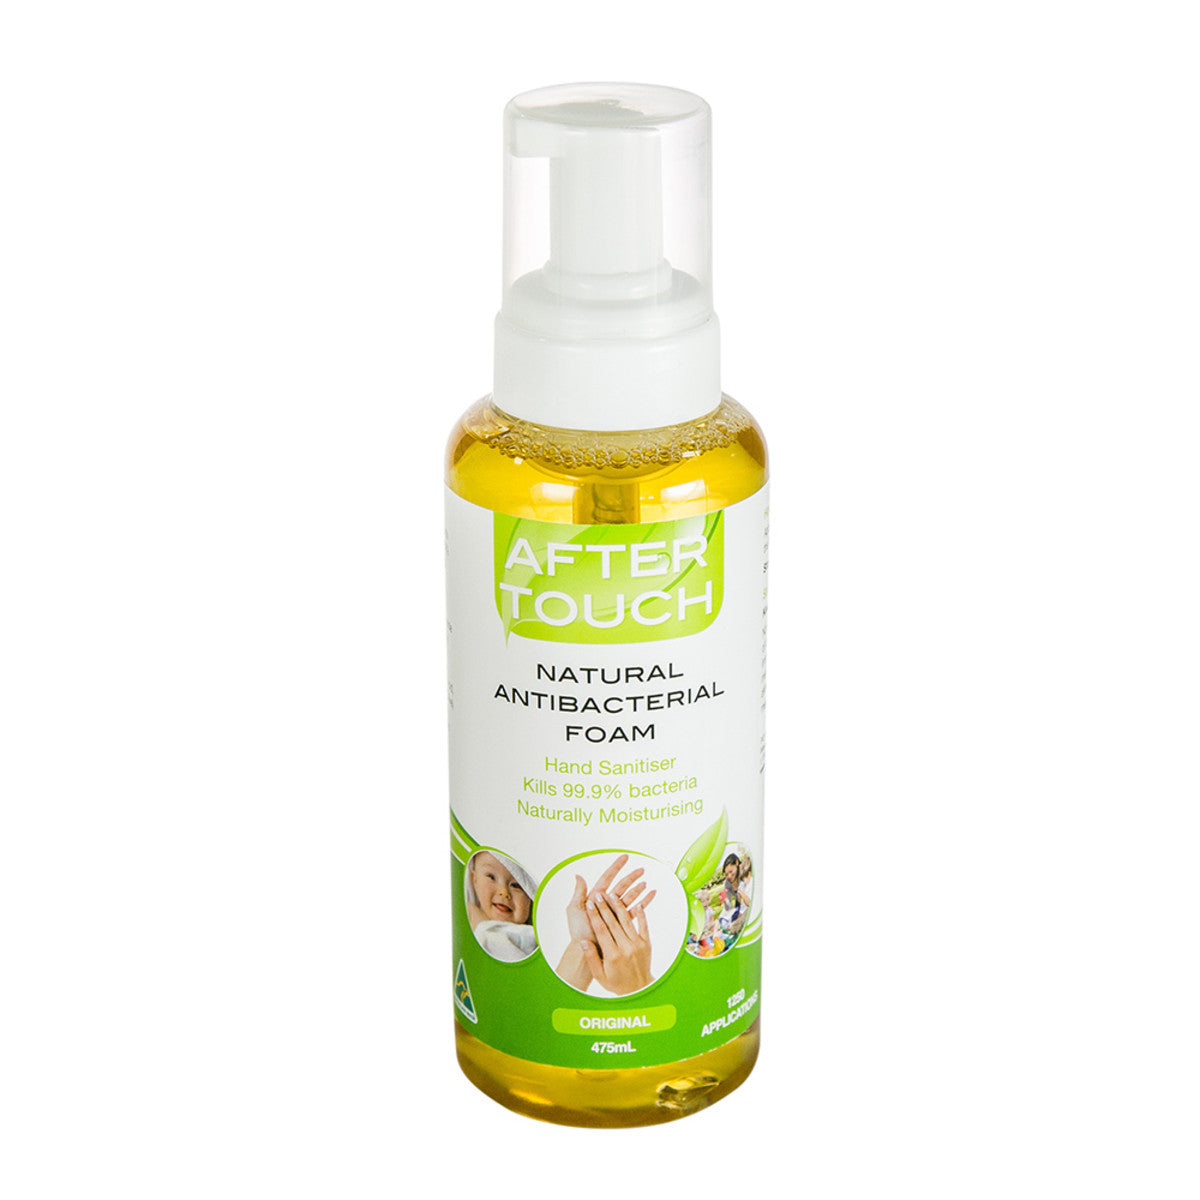 After Touch - Natural Antibacterial Hand Sanitising Foam